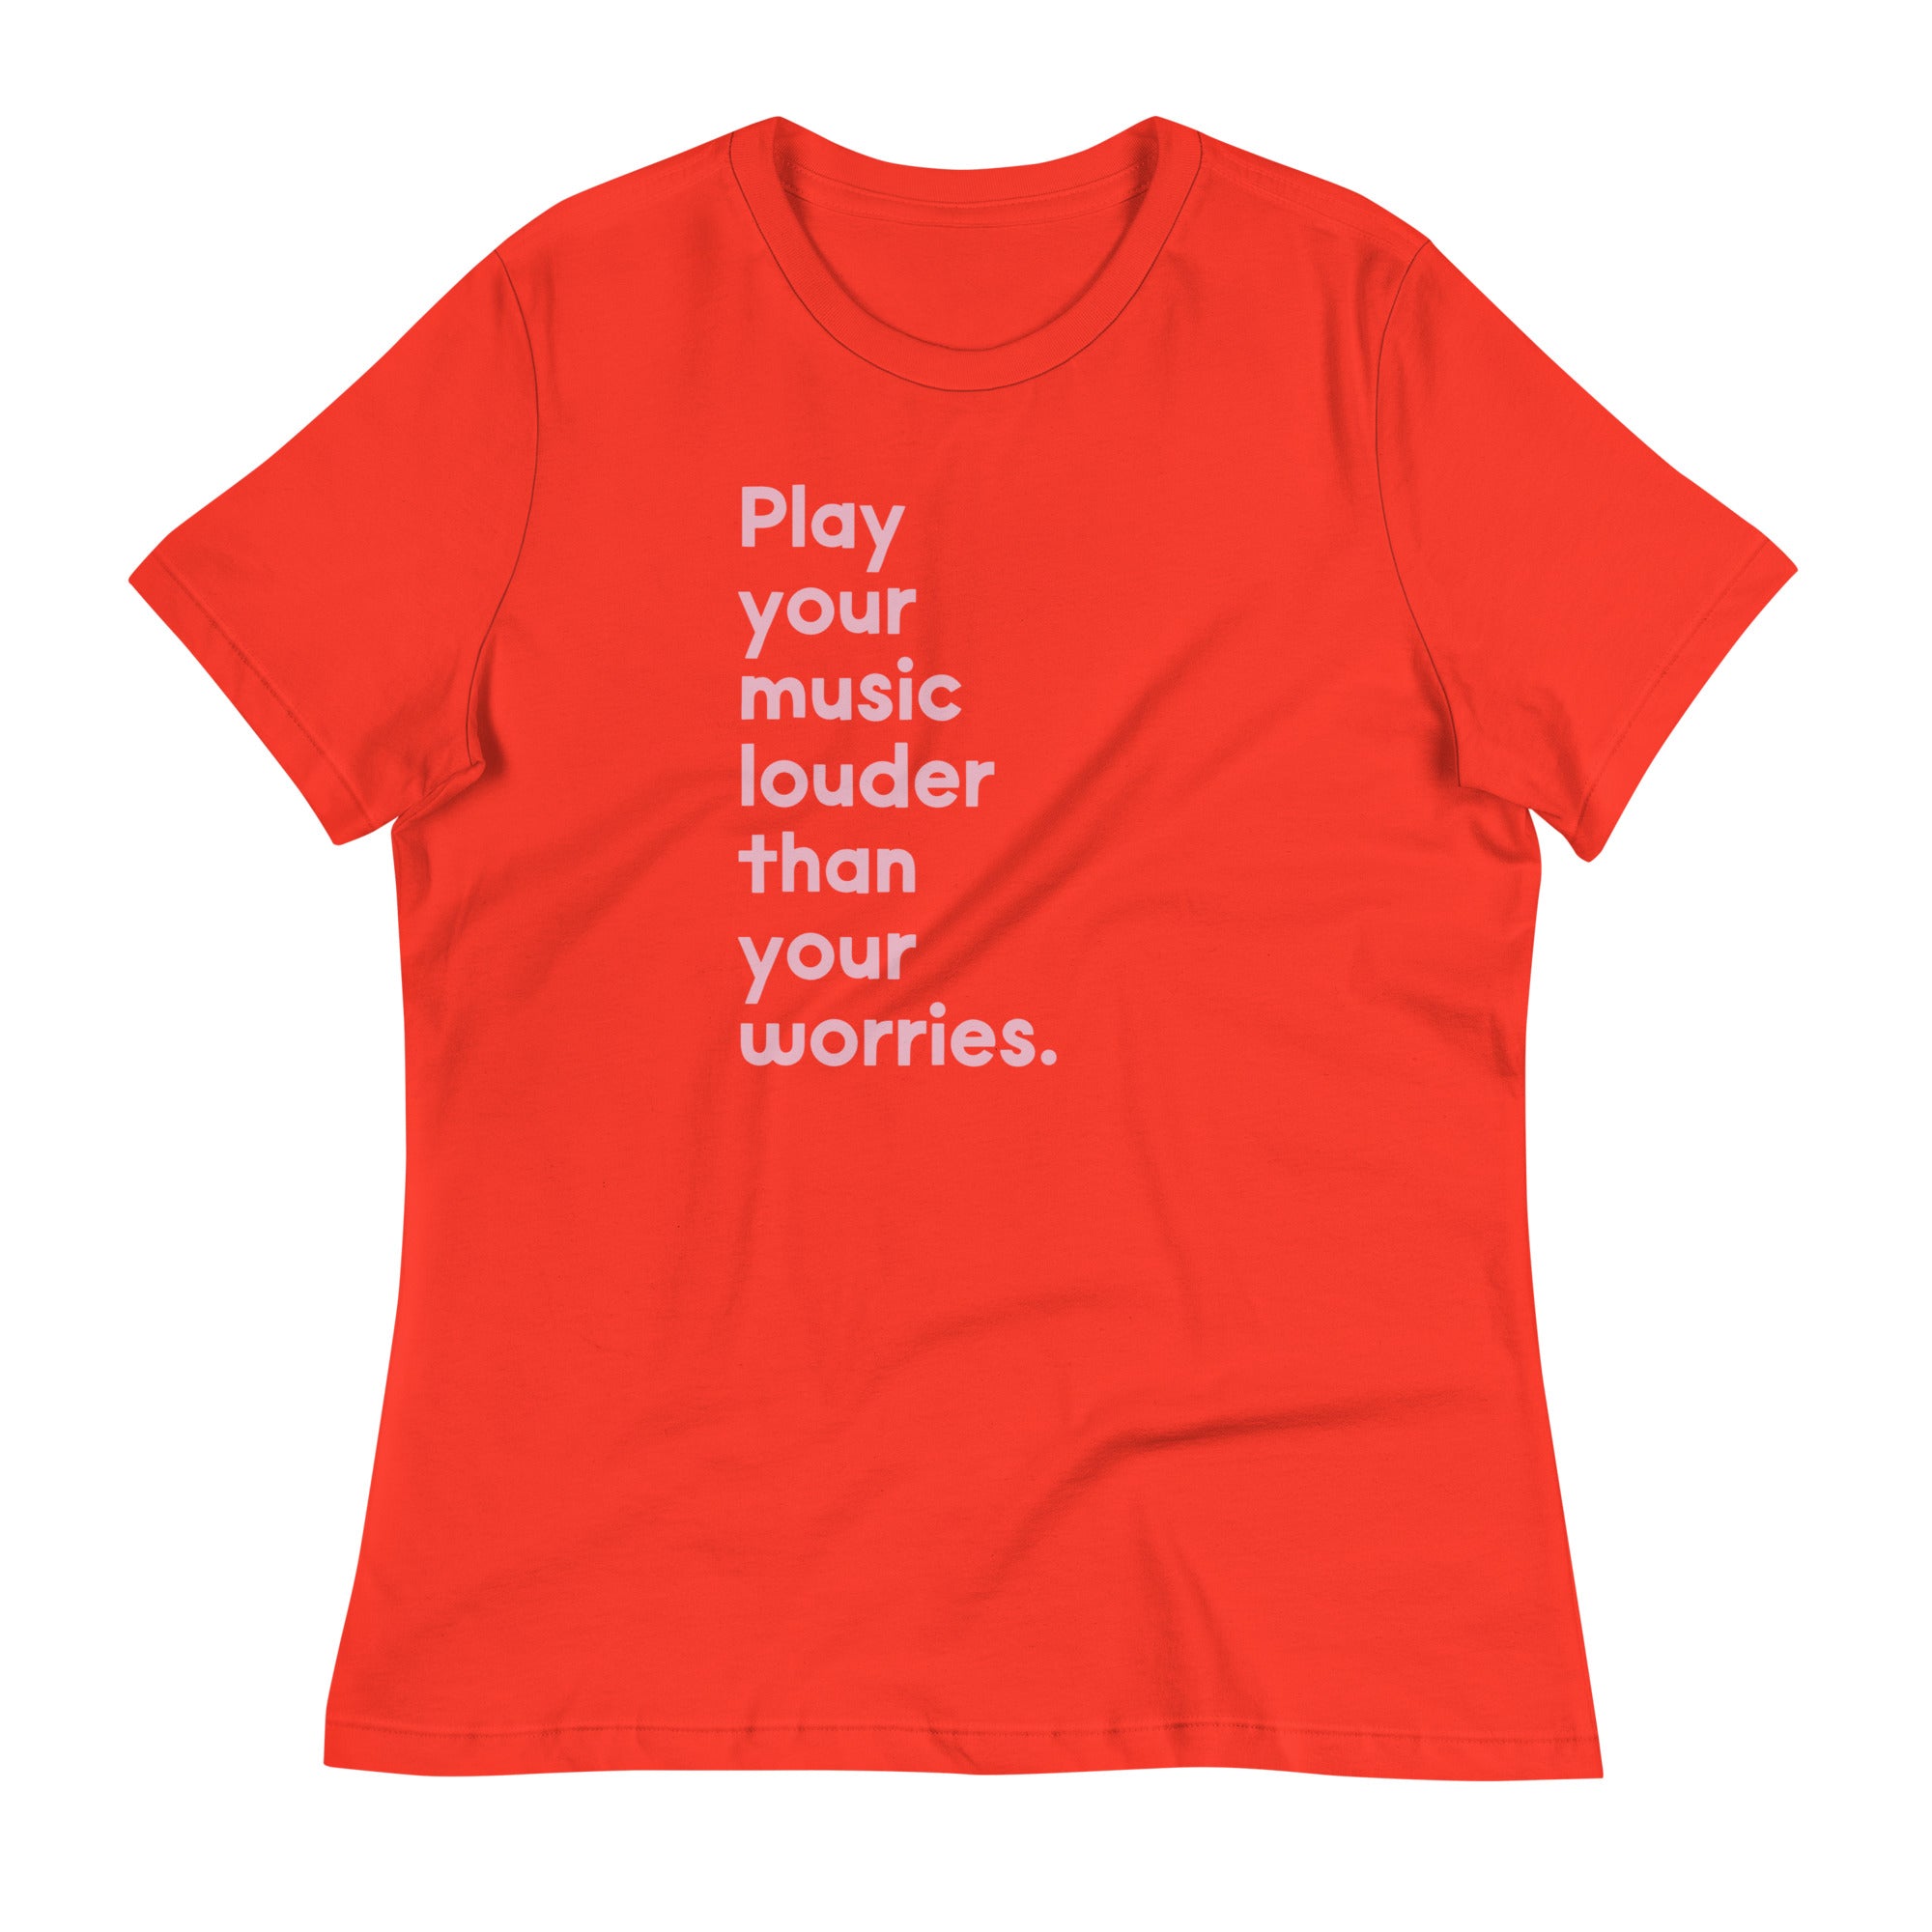 Play Your Music Louder Than Your Worries - Women's Fit T-Shirt